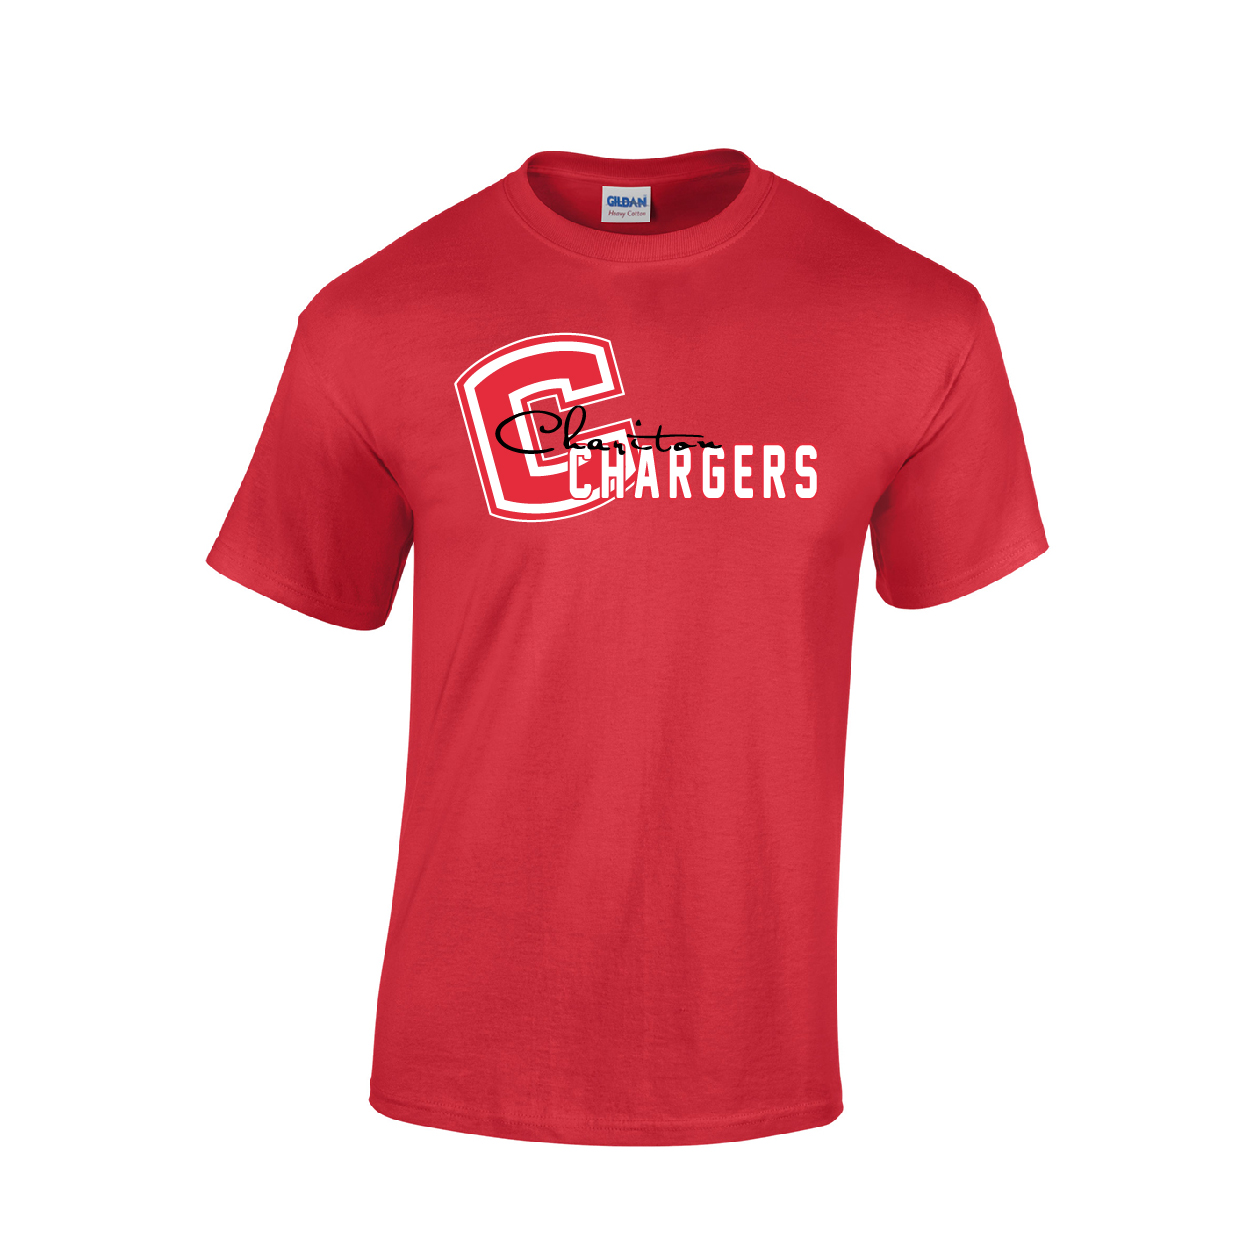 CHS Boosters Apparel & Merchandise - CHS Boosters